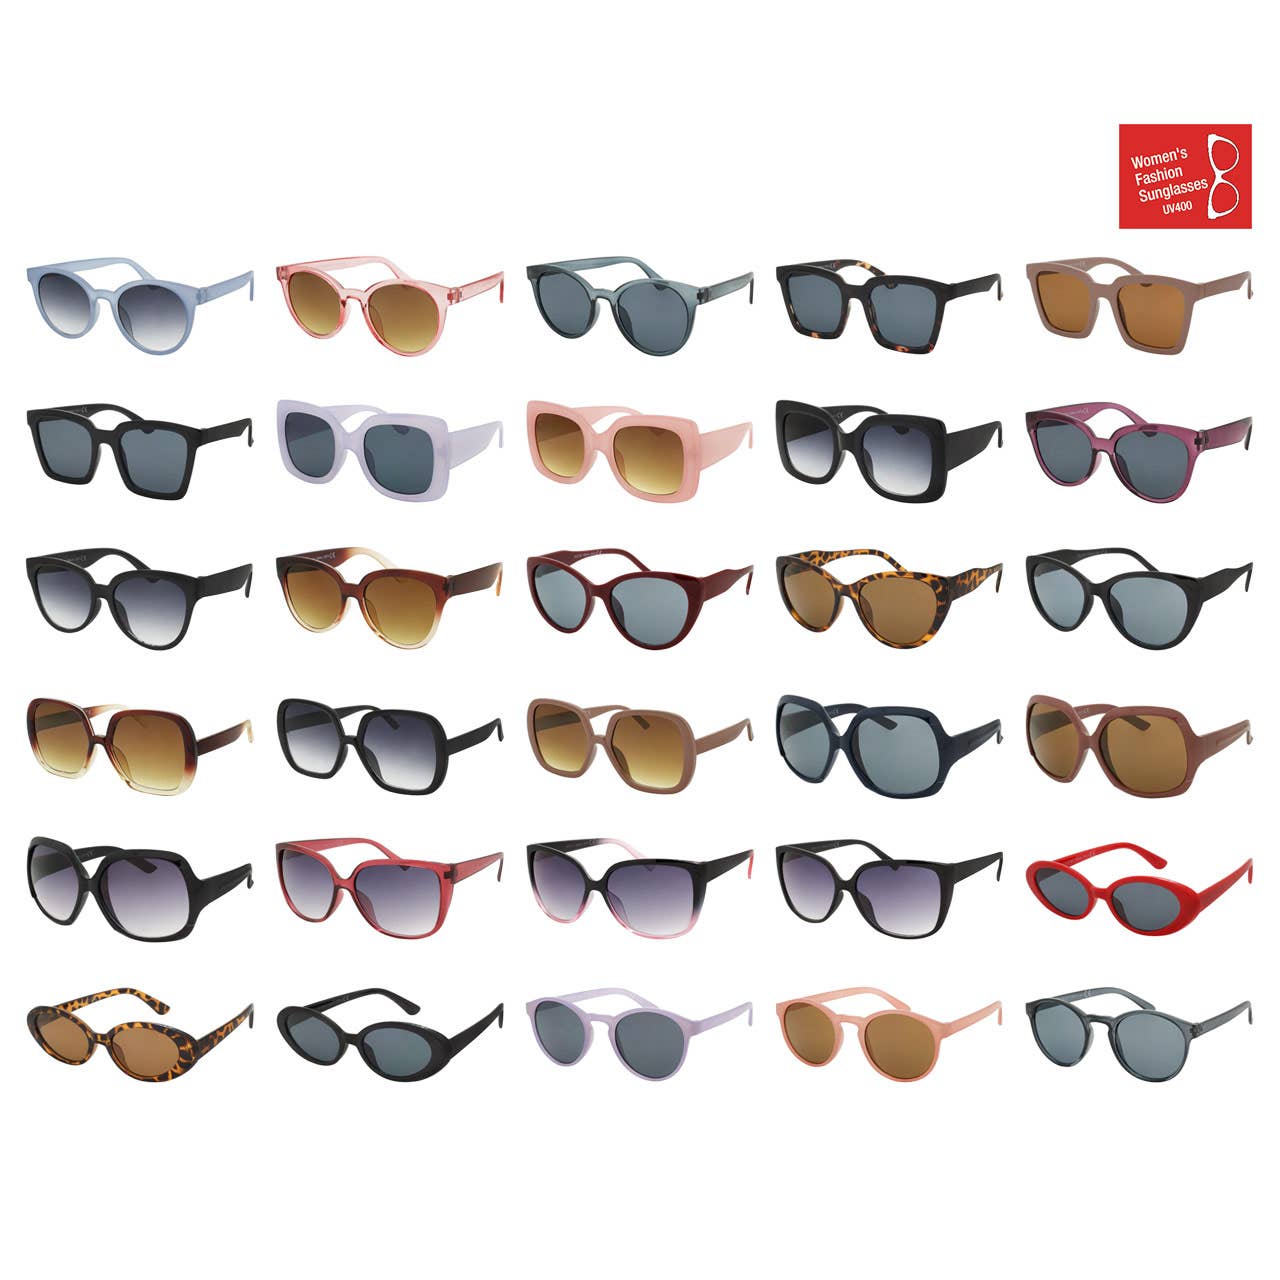 Ladies Sunglasses Mix Assorted Styles and Color Fashion New